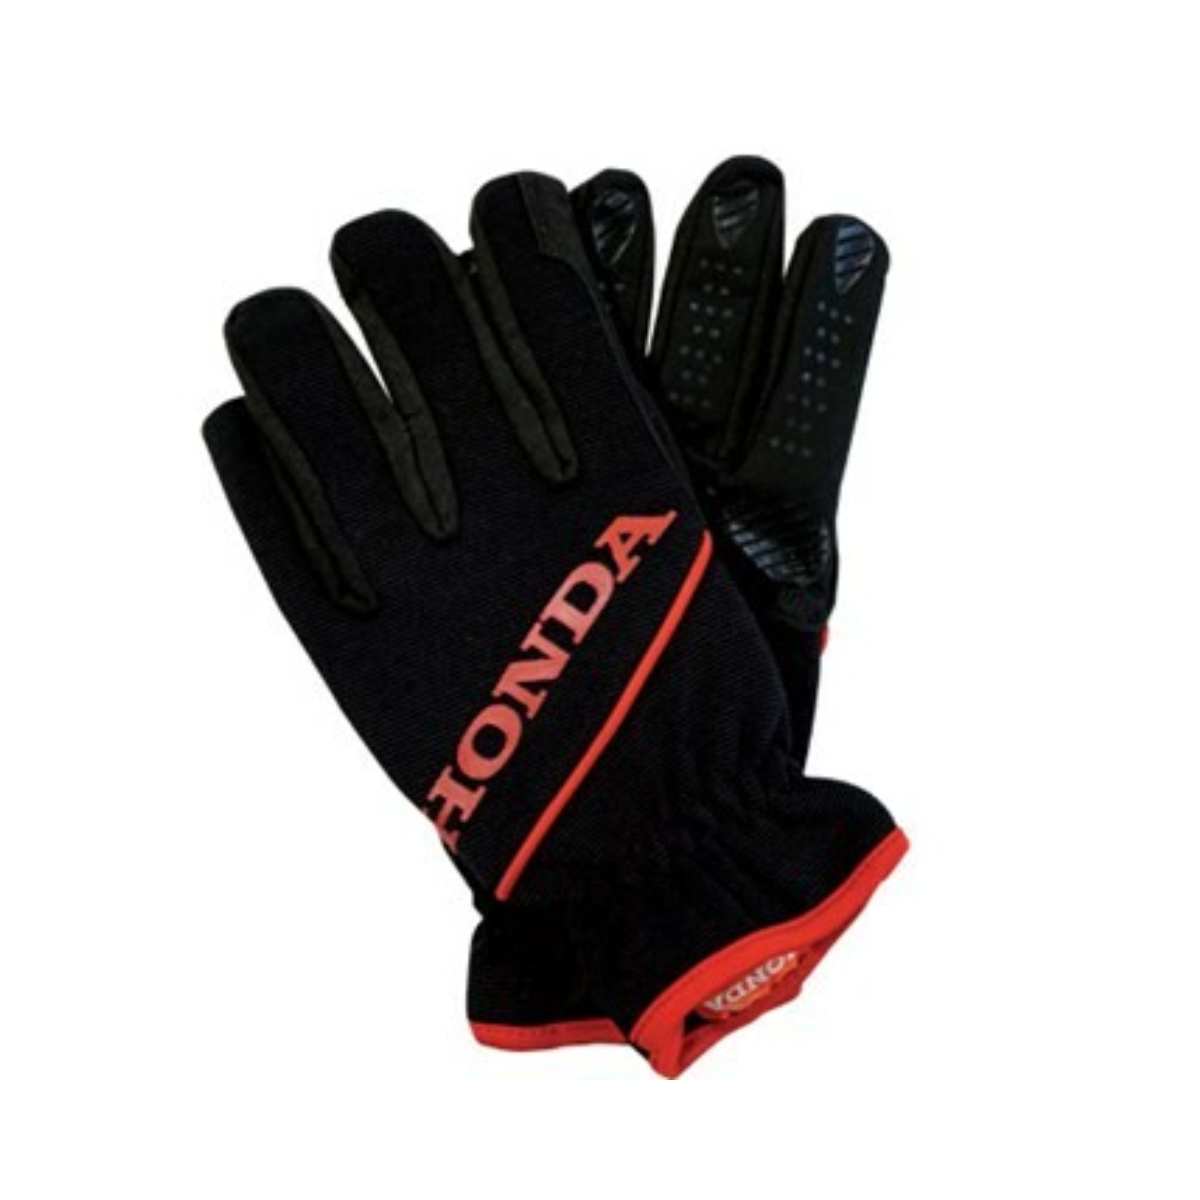 Leather Palm Heavy Duty Work Gloves Gardening, Chainsaw Gloves High Quality  Echo